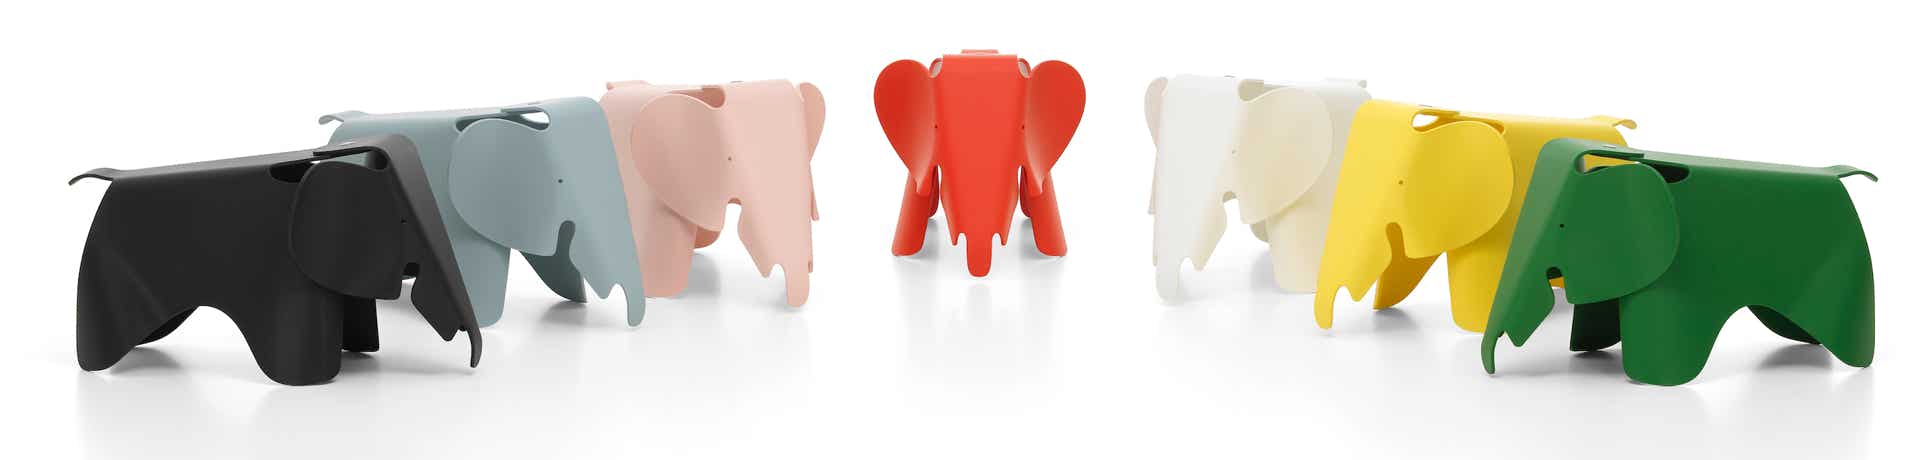 Eames Elephant polypropylene or plywood Charles & Ray Eames collection